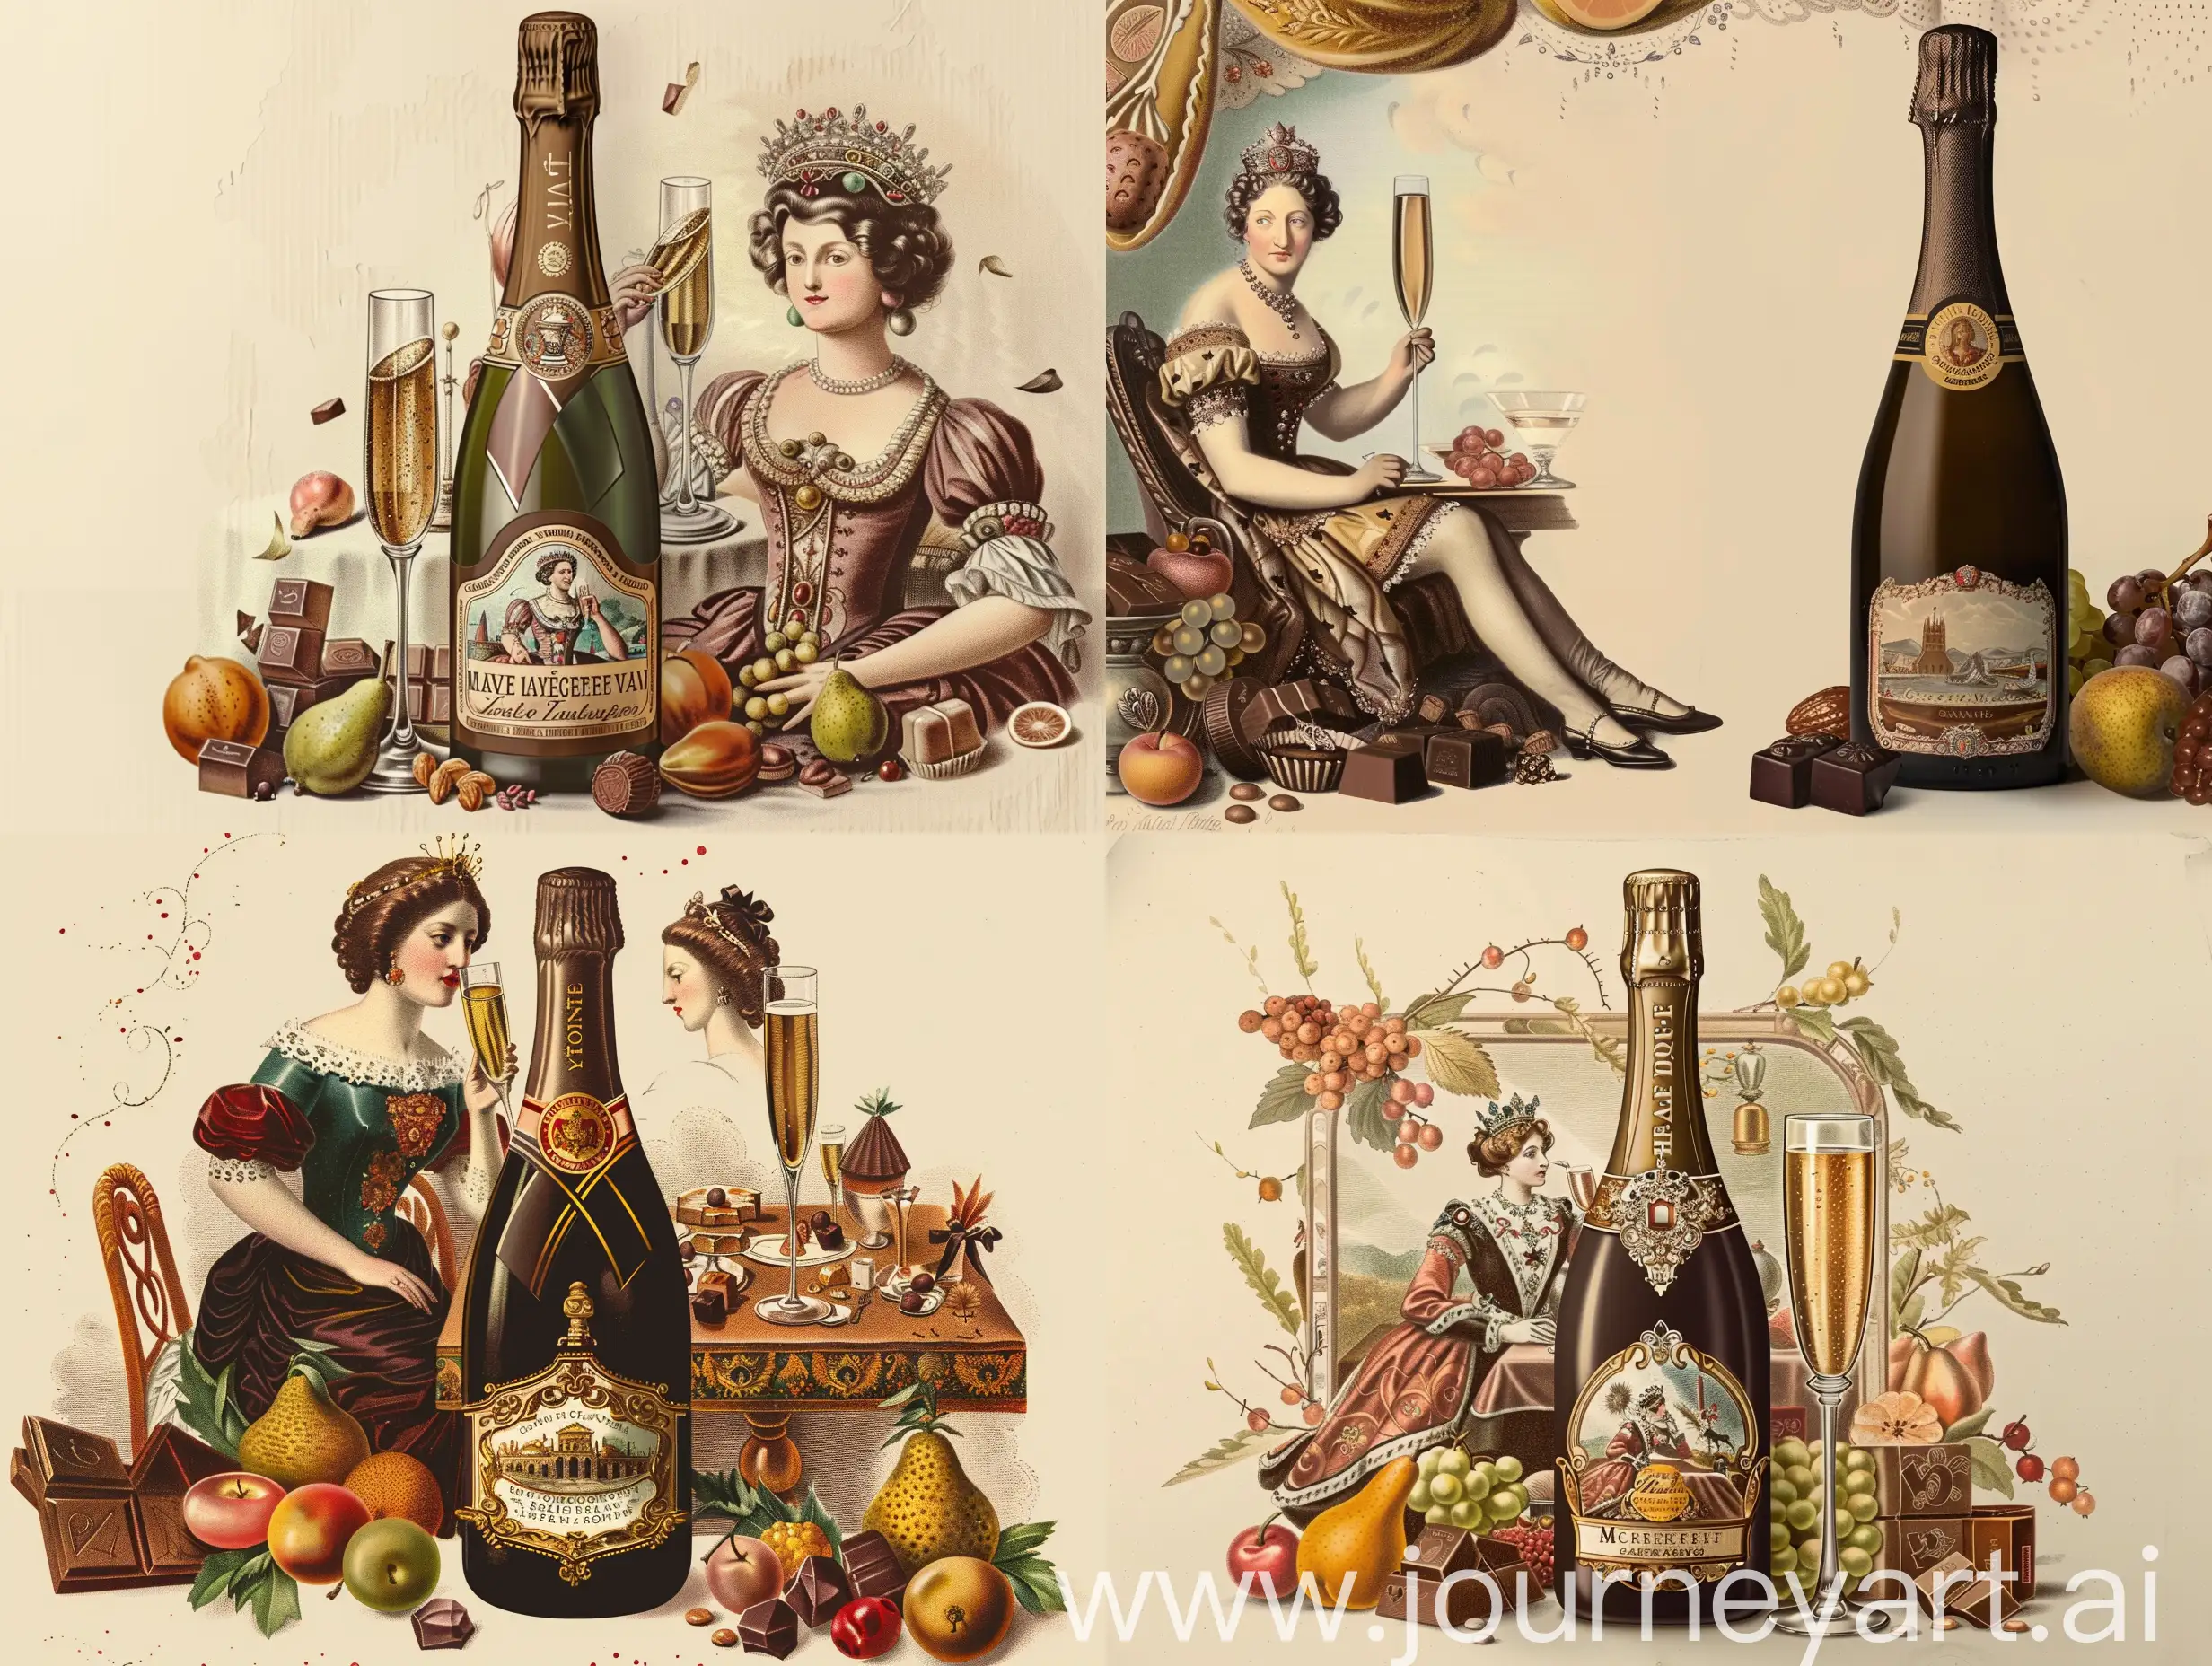 Vintage illustration: A bottle of champagne in the foreground, the label depicts the queen of ancient Austria sitting at a table and drinking champagne from a tall glass, in the background the queen sits at a table in profile with her head thrown back and holds a glass of champagne in her outstretched hand, around the ornament is nuanced from chocolates, fruits, vintage style, flat illustration, colored afort, on a background of light beige print paper